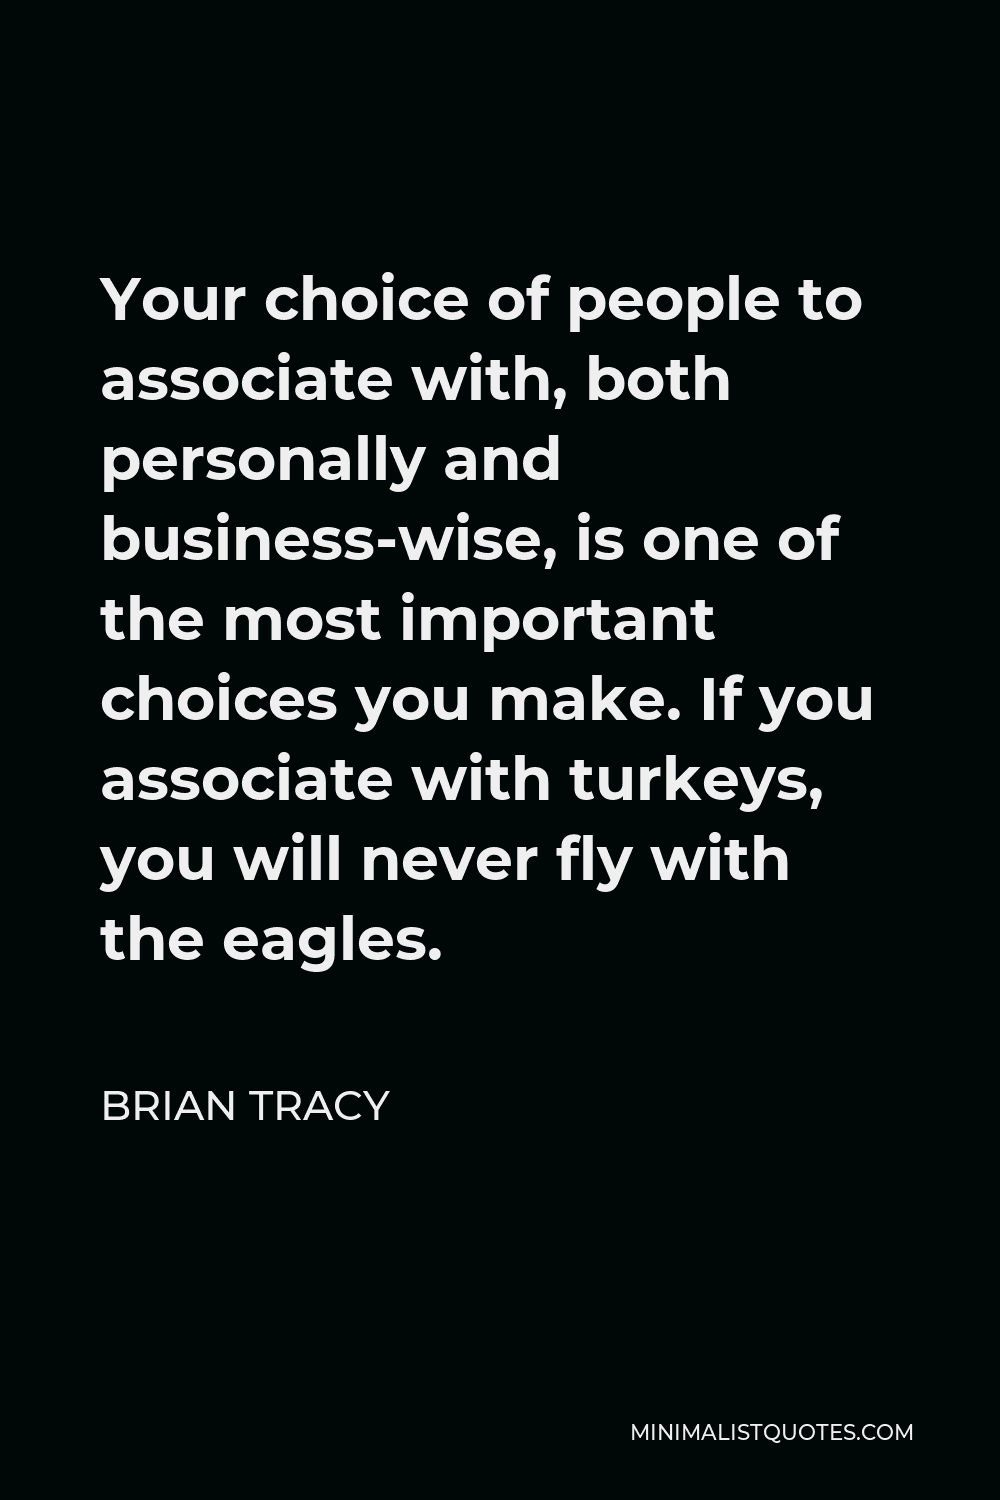 Brian Tracy Quote - Your choice of people to associate with, both personally and business-wise, is one of the most important choices you make. If you associate with turkeys, you will never fly with the eagles.